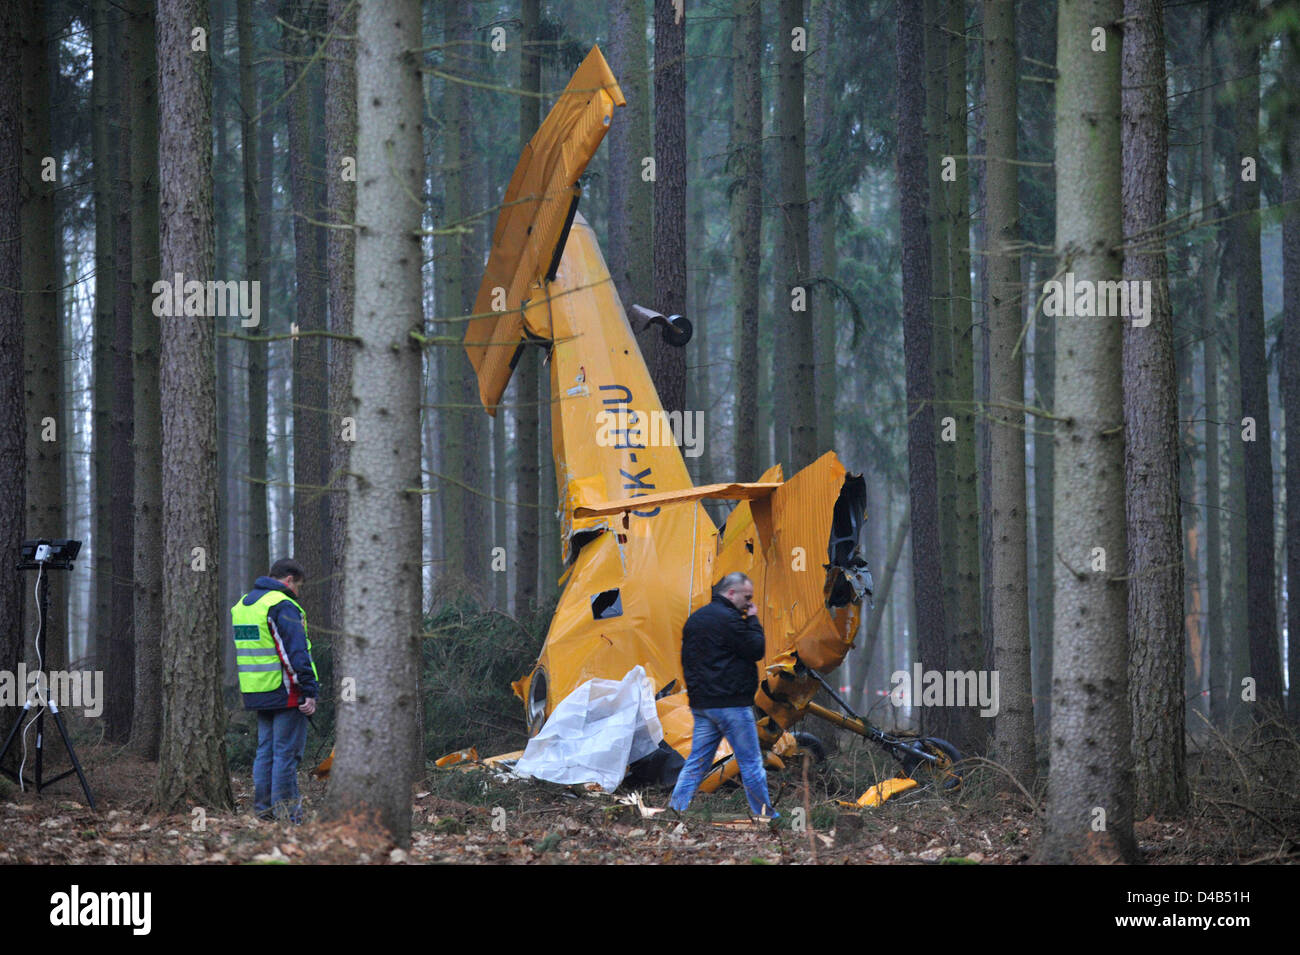 Srbce, Czech Republic. 9th March 2013. Crop duster airplane Z37-A Cmelak  crashed into woods close to village of Srbce in Chrudim region (120 kms east from Prague), Czech Republic on March 9, 2013. 55 years old pilot died in accident. (CTK Photo/David Tanecek/Alamy Live News) Stock Photo